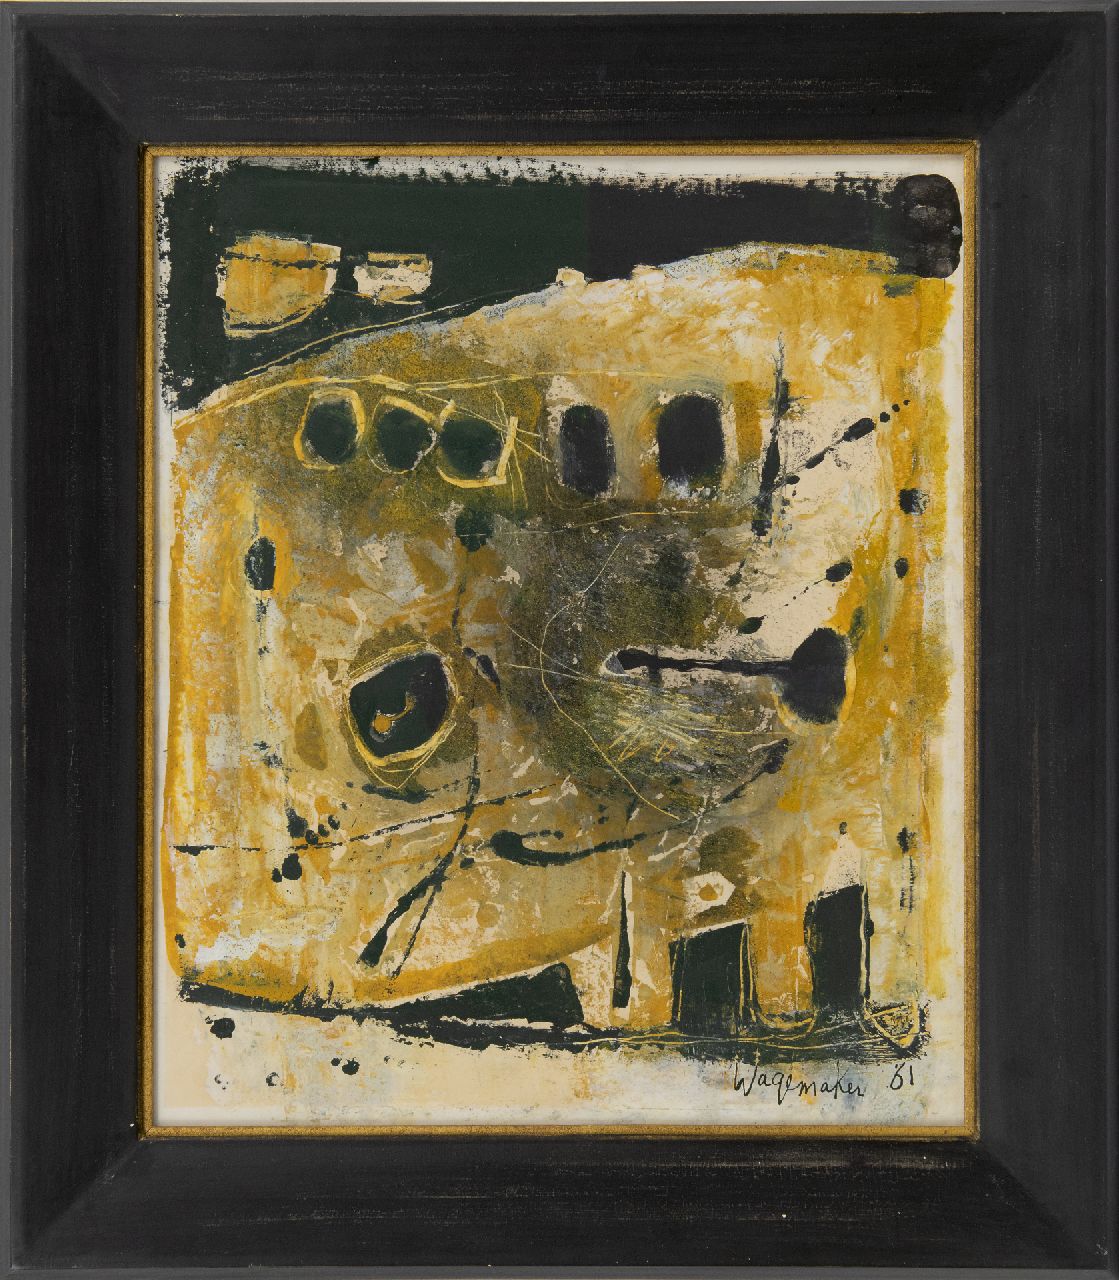 Wagemaker A.B.  | Adriaan Barend 'Jaap' Wagemaker, Abstract in yellow and black, mixed media on paper 54.0 x 44.5 cm, signed l.r. and dated '61